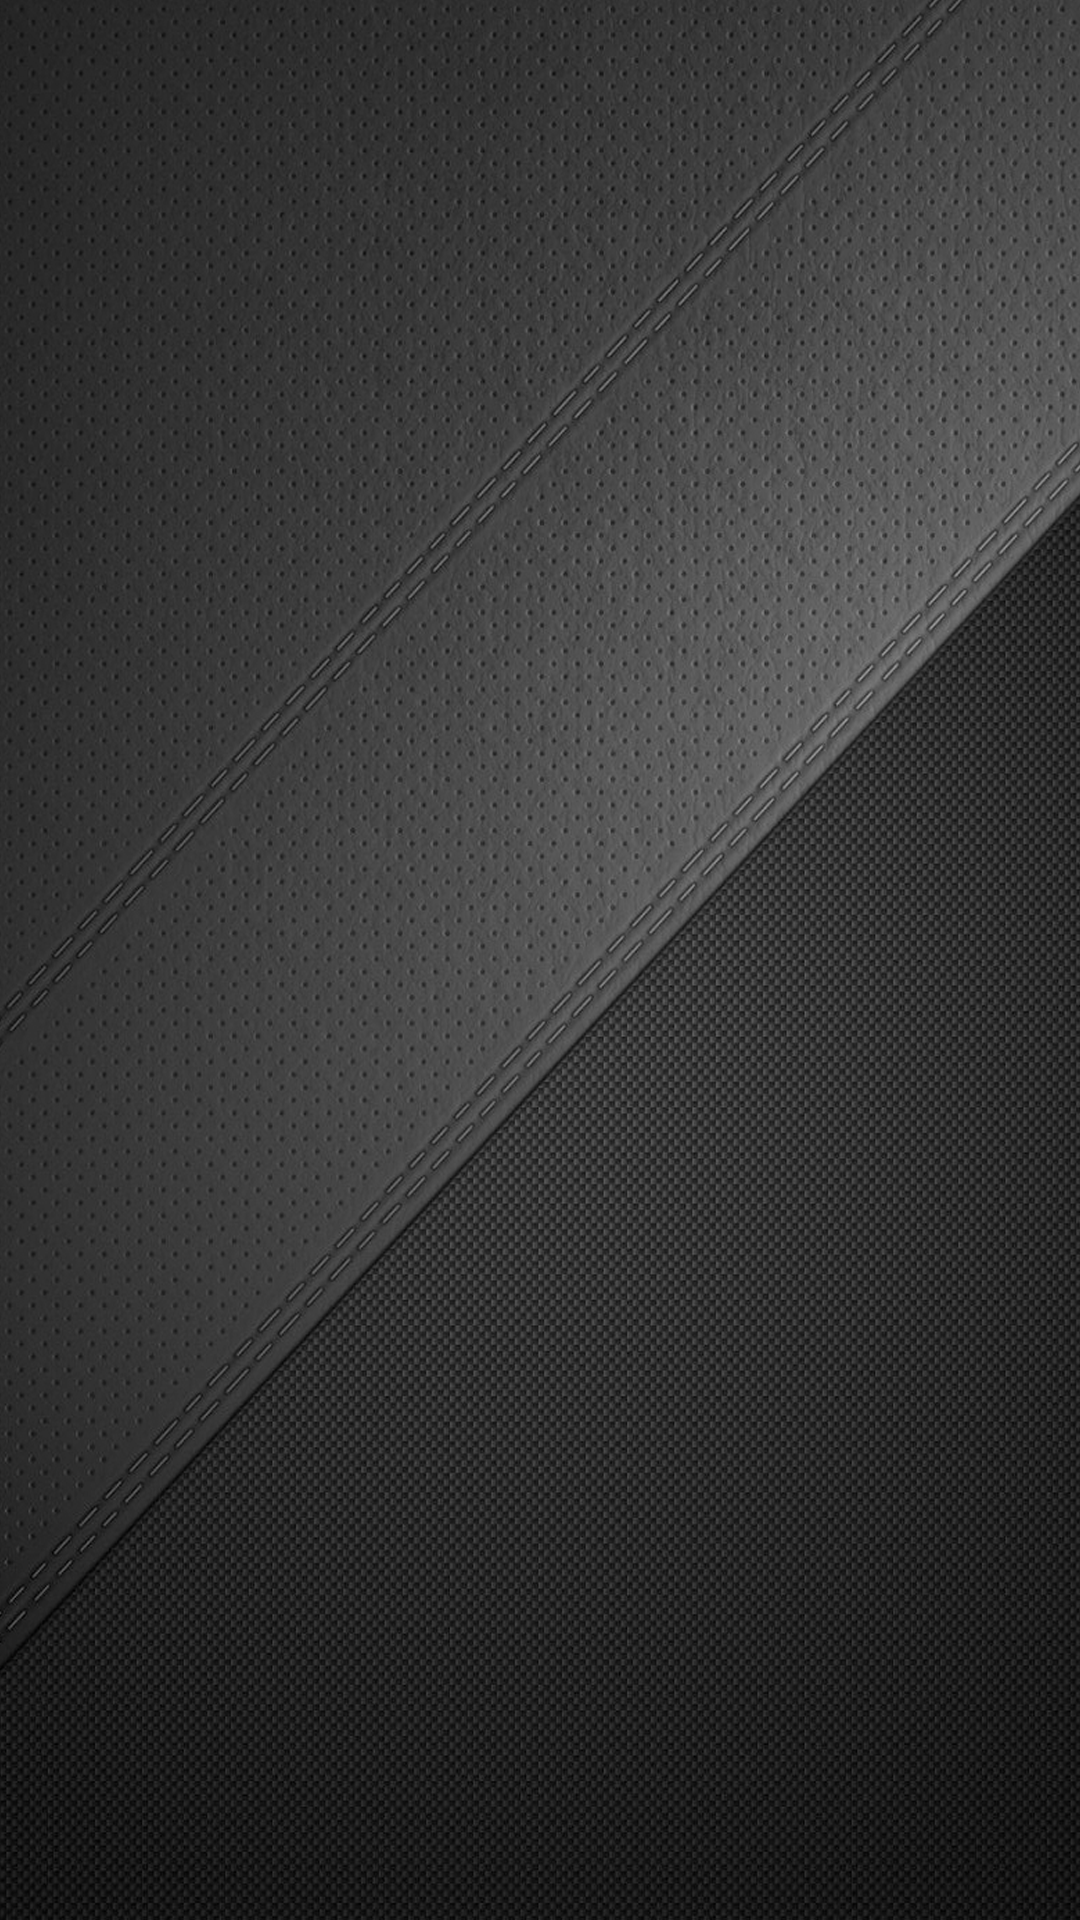 Textures #Perforated Leather Texture Dark Android Wallpaper #wallpaper HD 4k background for andro. Phone wallpaper, Android wallpaper, Black abstract background